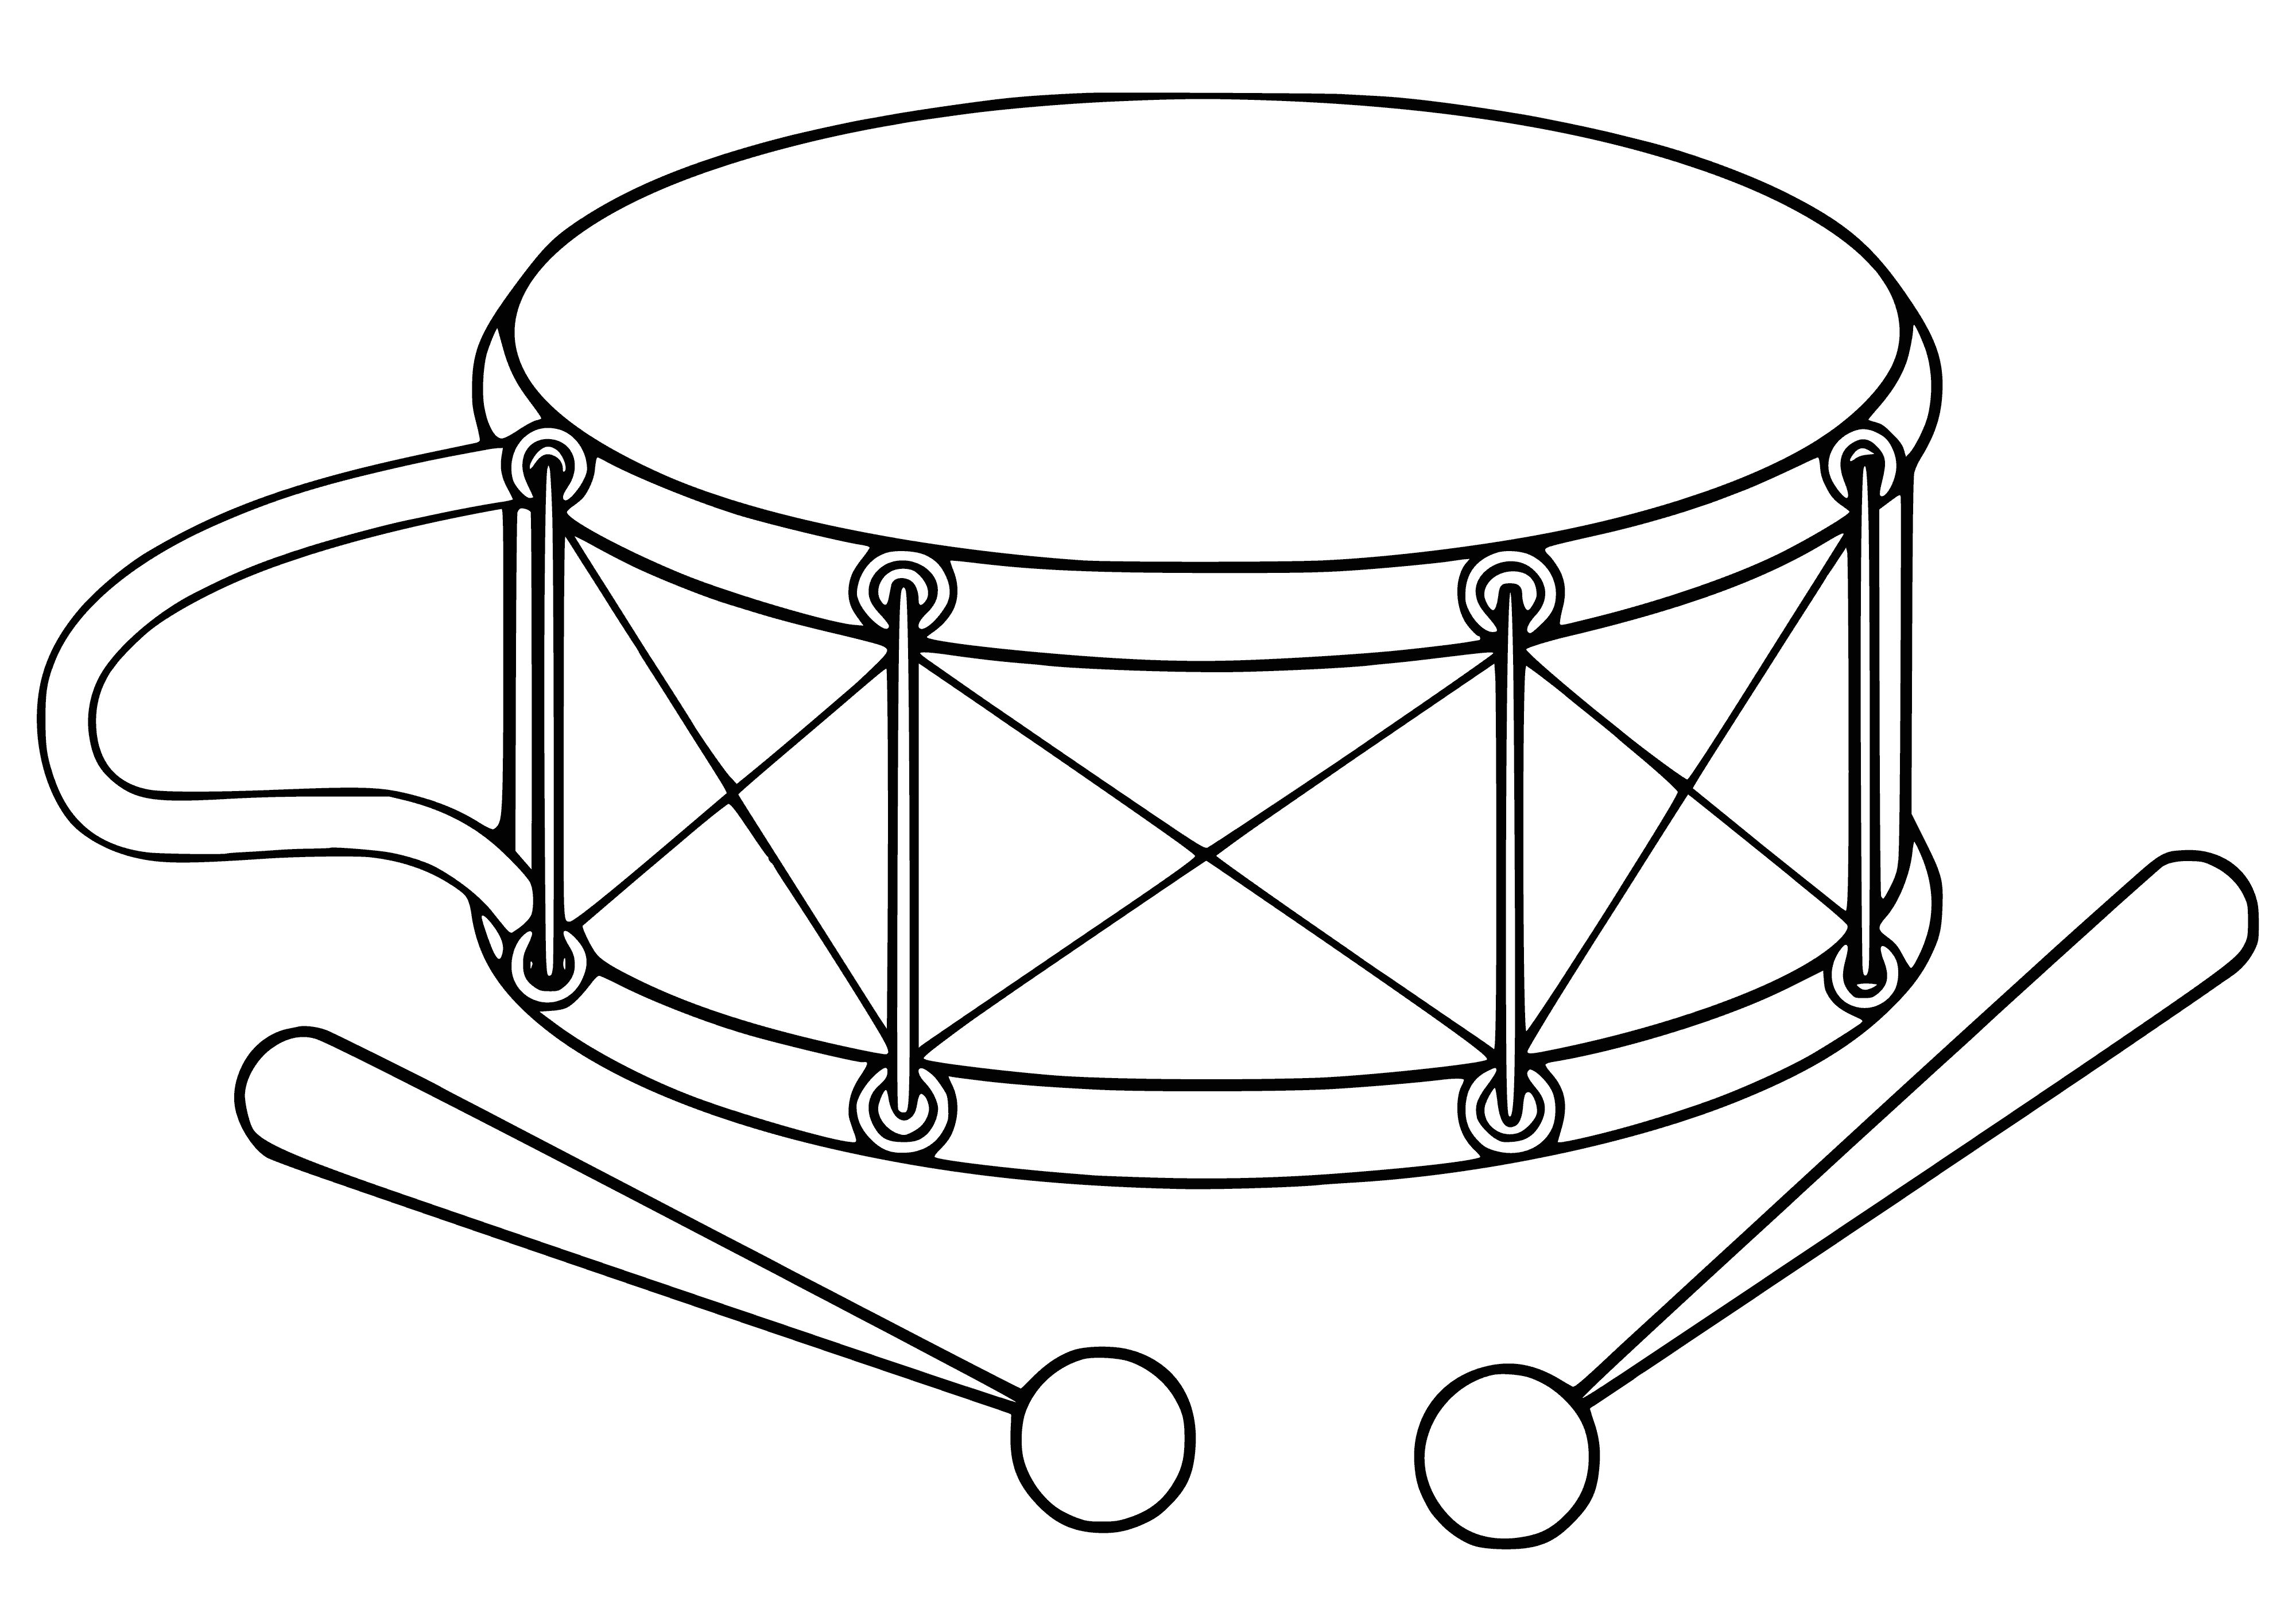 coloring page: Drum in middle of coloring page, cylindrical shape with curved top. Brown with black stripe and white circle in middle; two drumsticks across top.